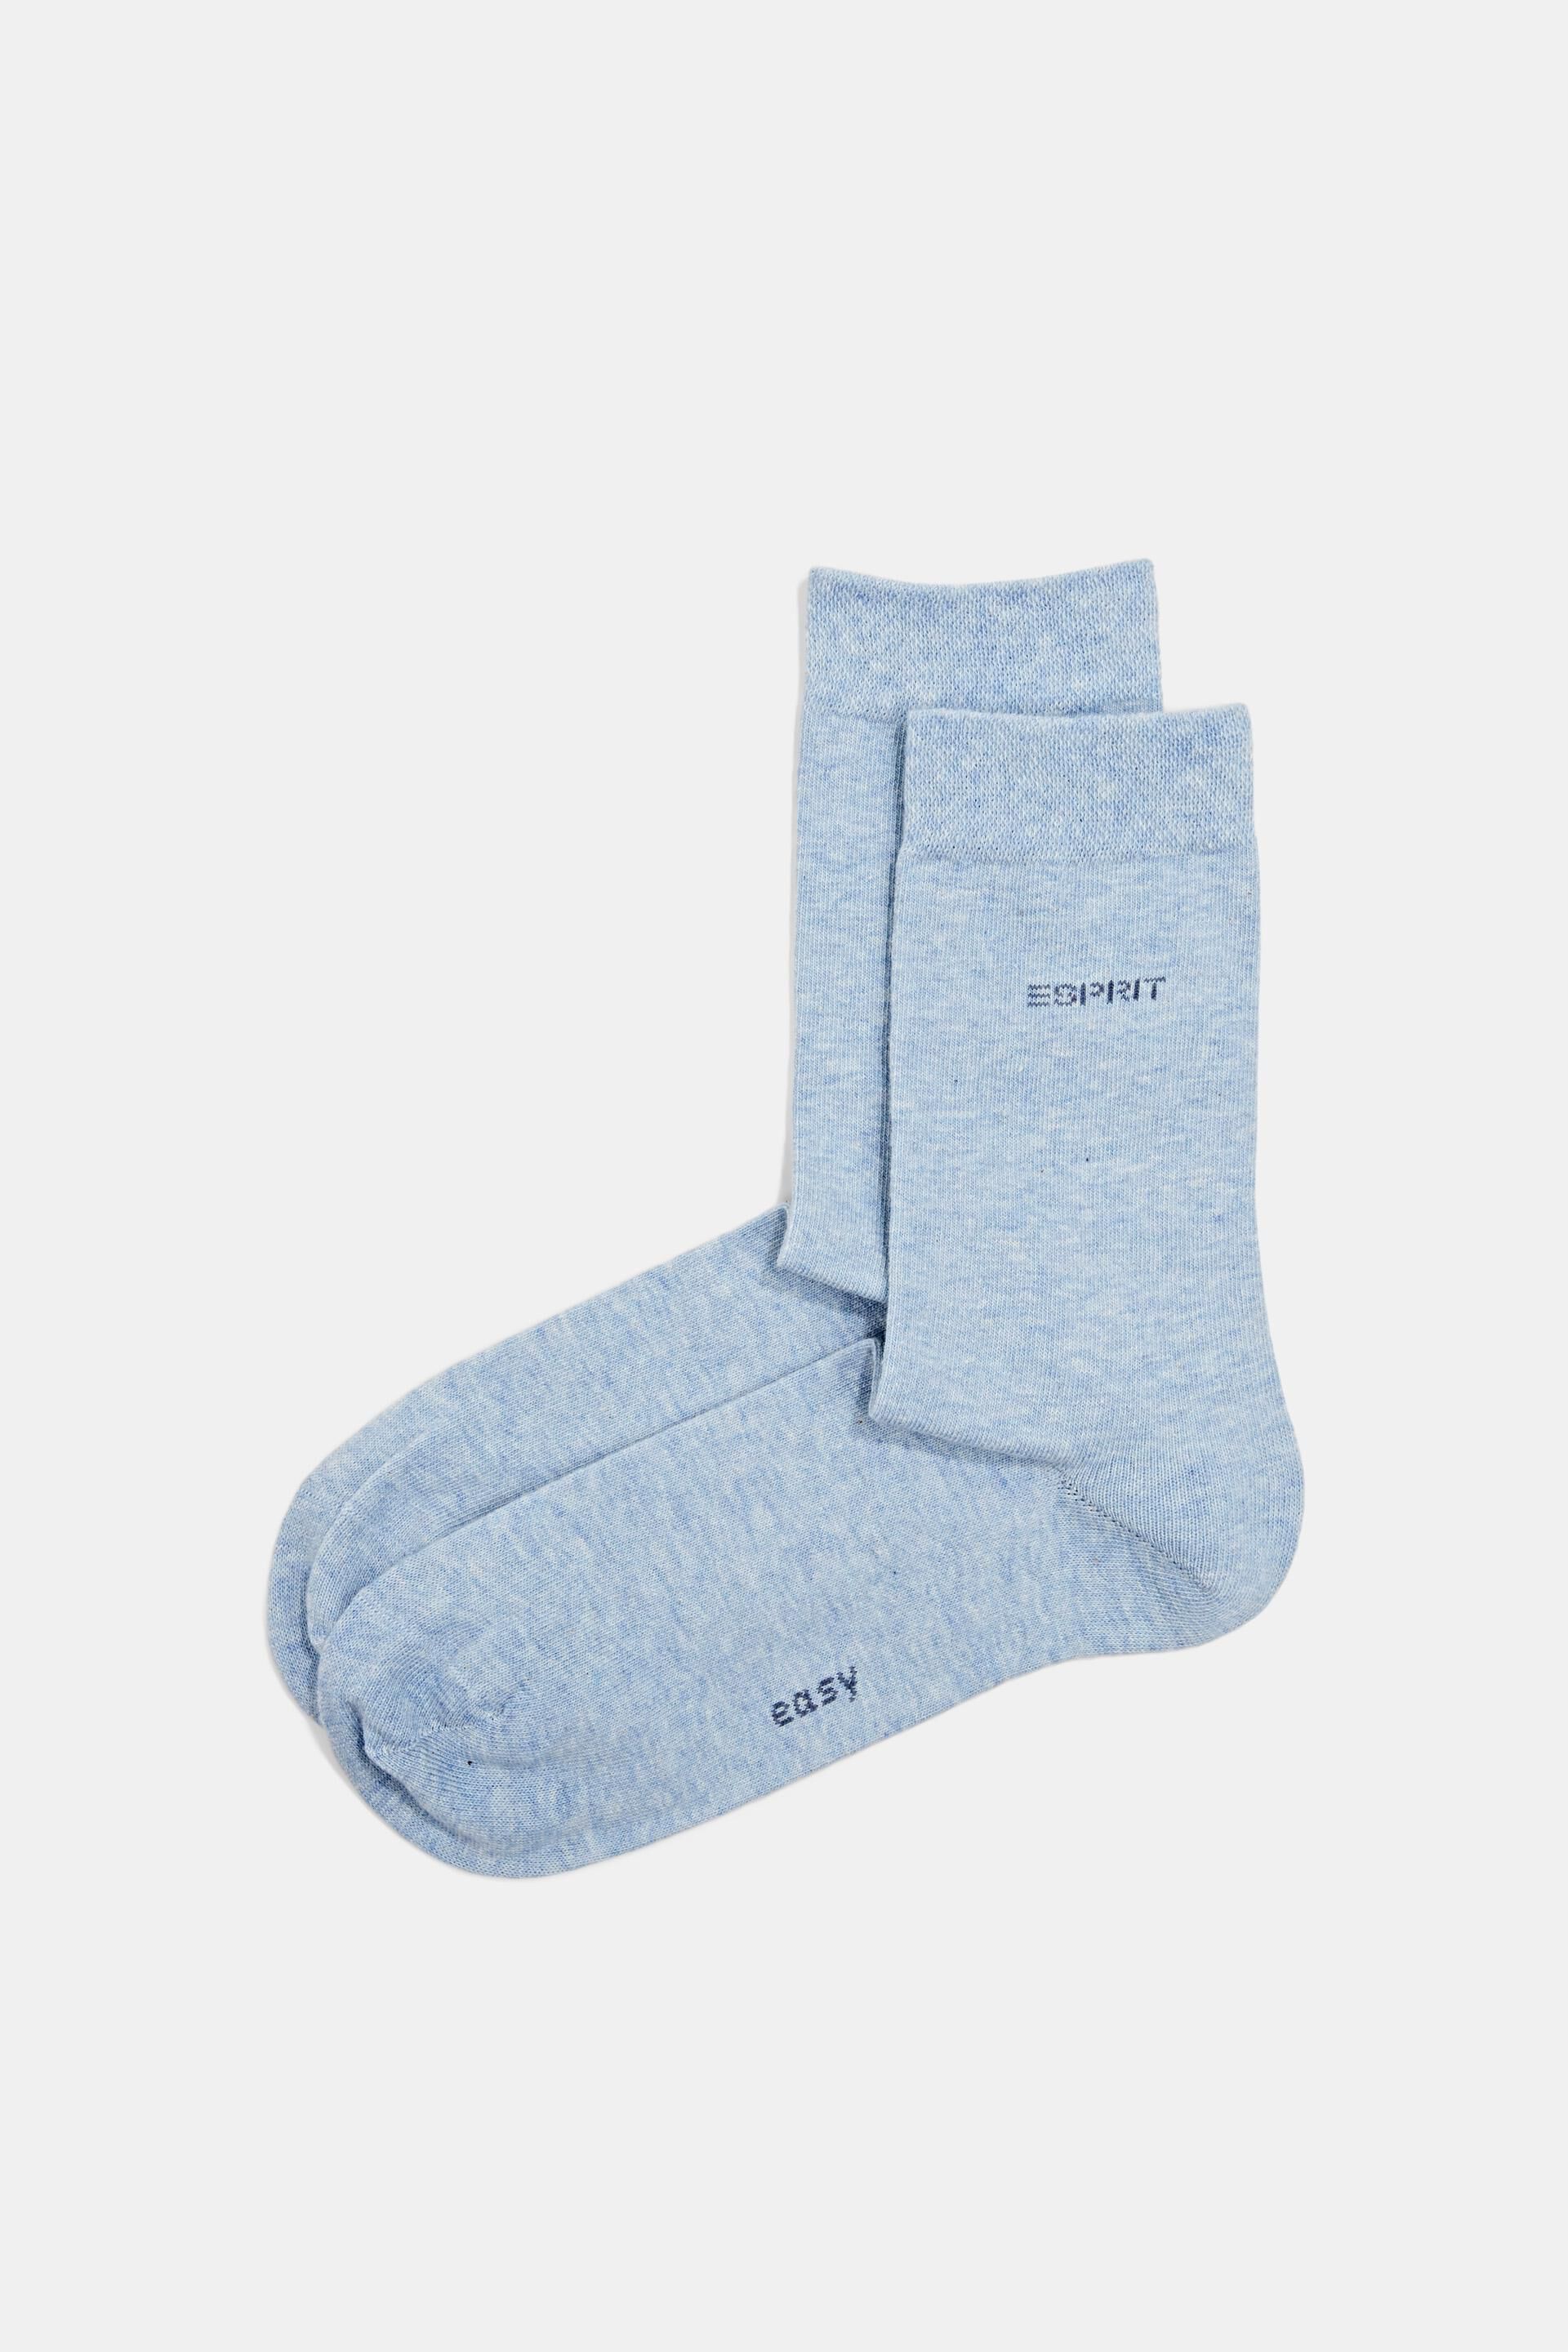 Esprit Online Store Double pack of socks made of blended organic cotton